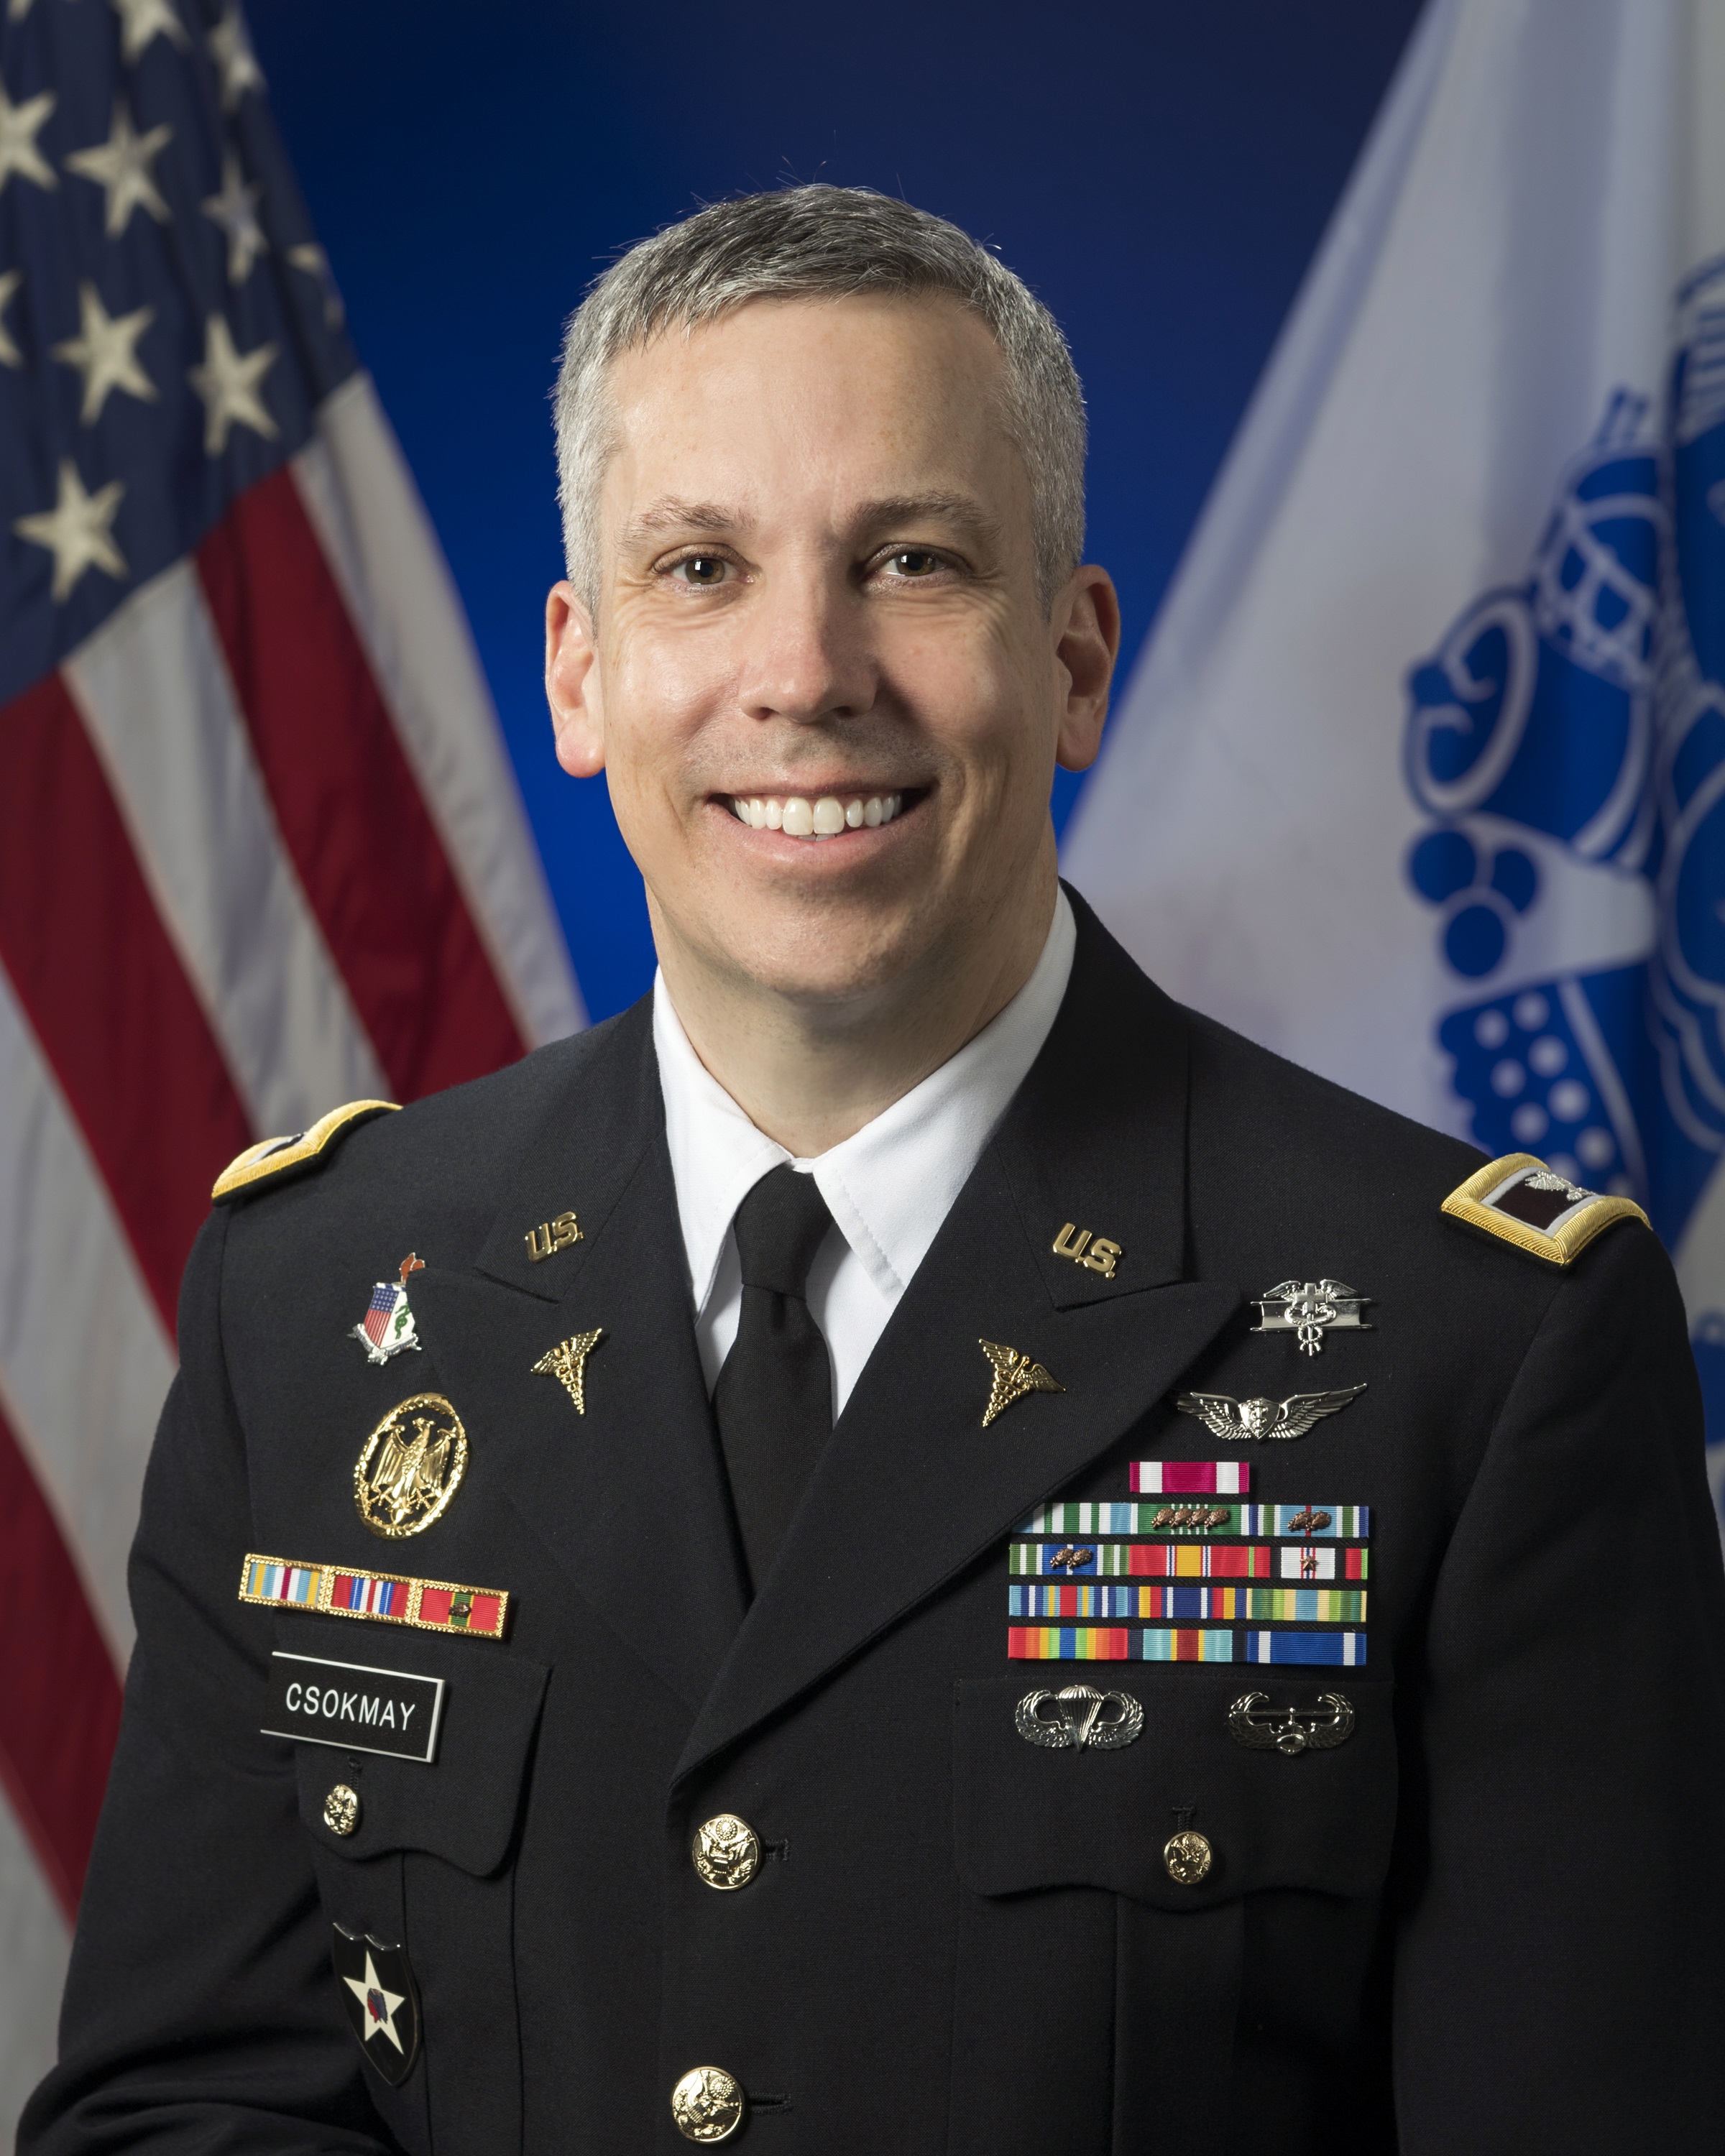 Army Honoree Colonel Csokmay